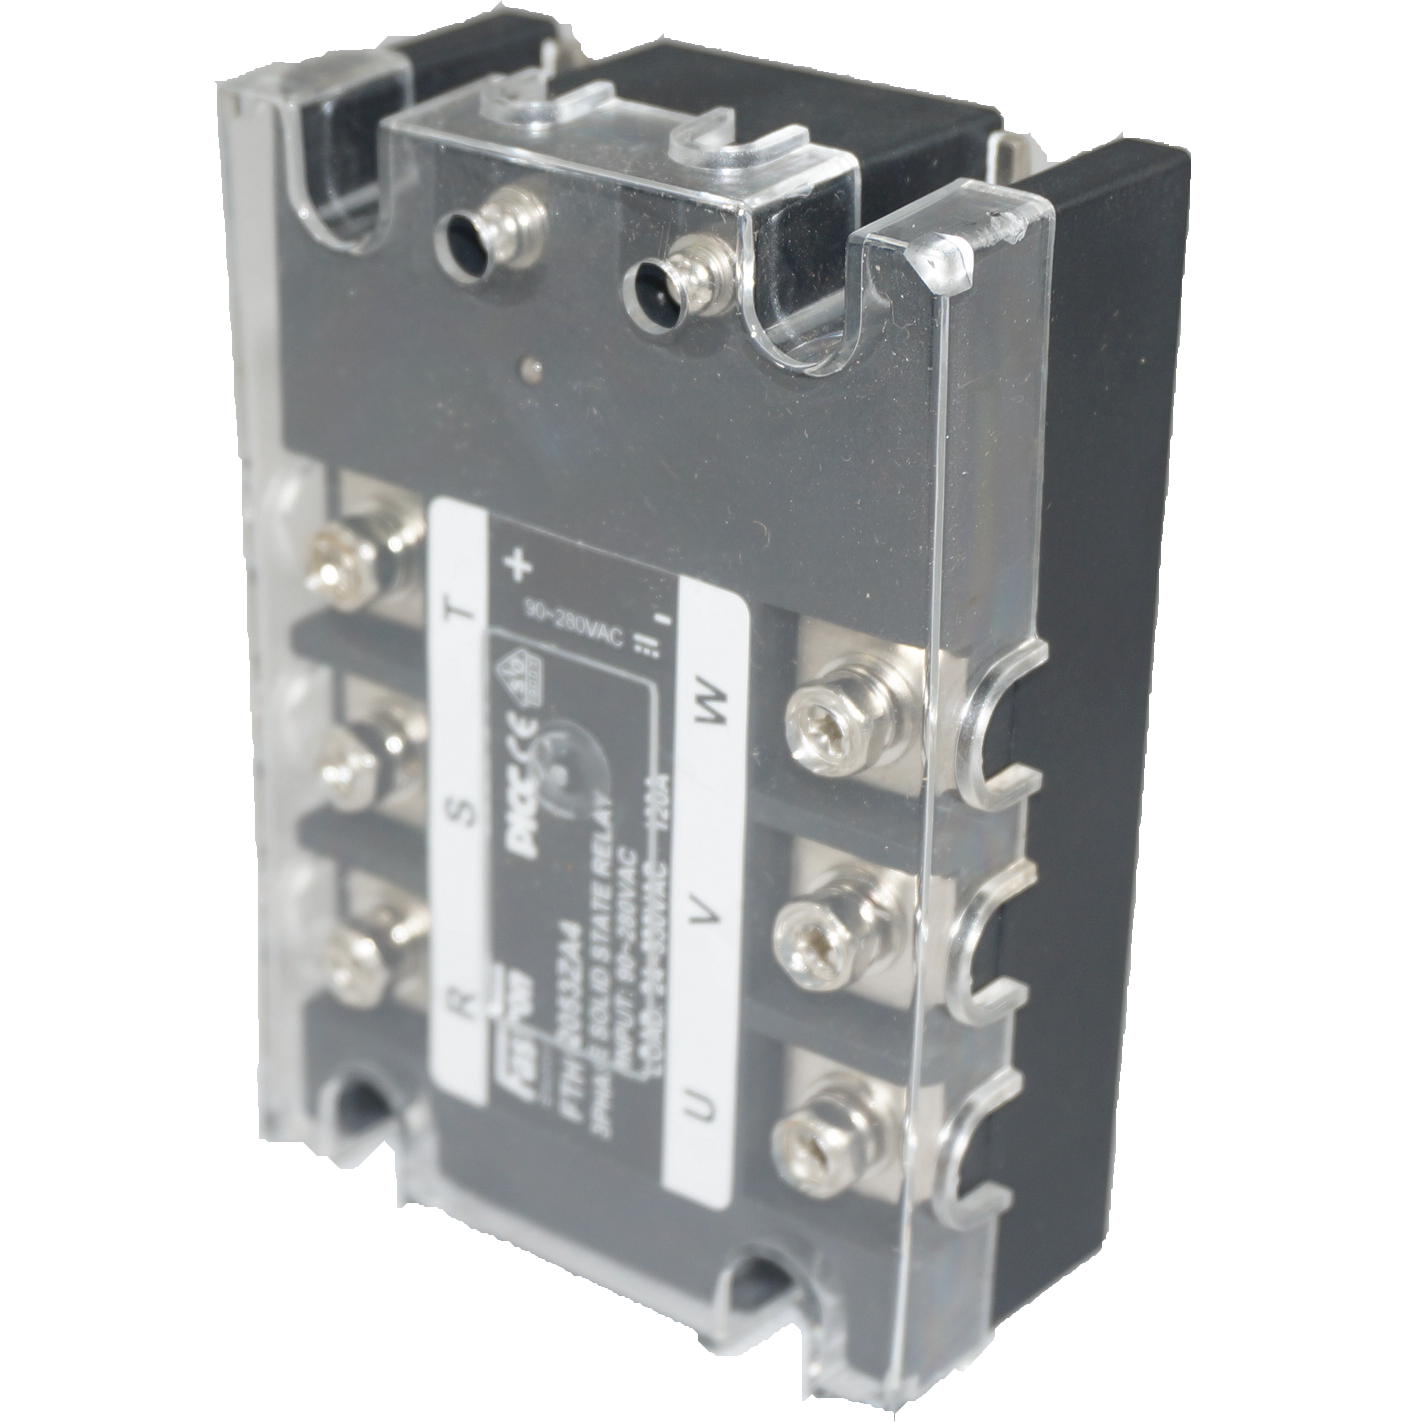 FTH2553ZA4, Solid State Relay, 3 Phase 90-280VAC Control, 25A, 70-530VAC Load, with IP20 Cover